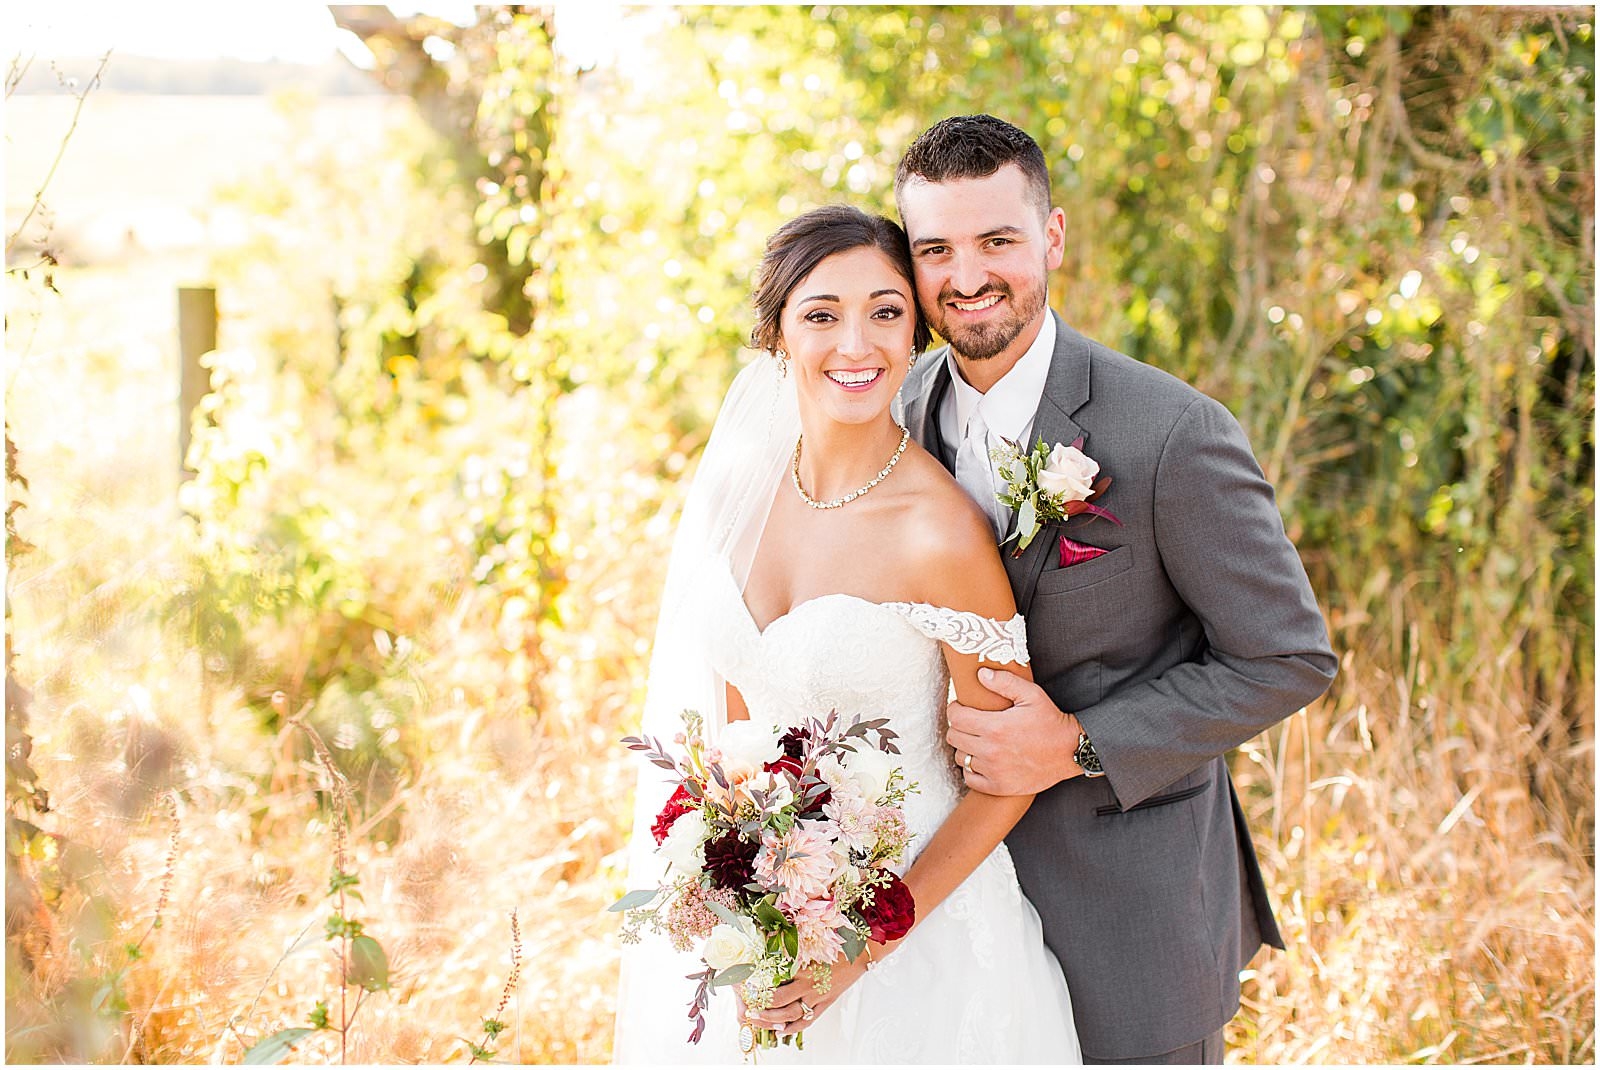 A Stunning Fall Wedding in Indianapolis, IN |. Sally and Andrew | Bret and Brandie Photography 0120.jpg